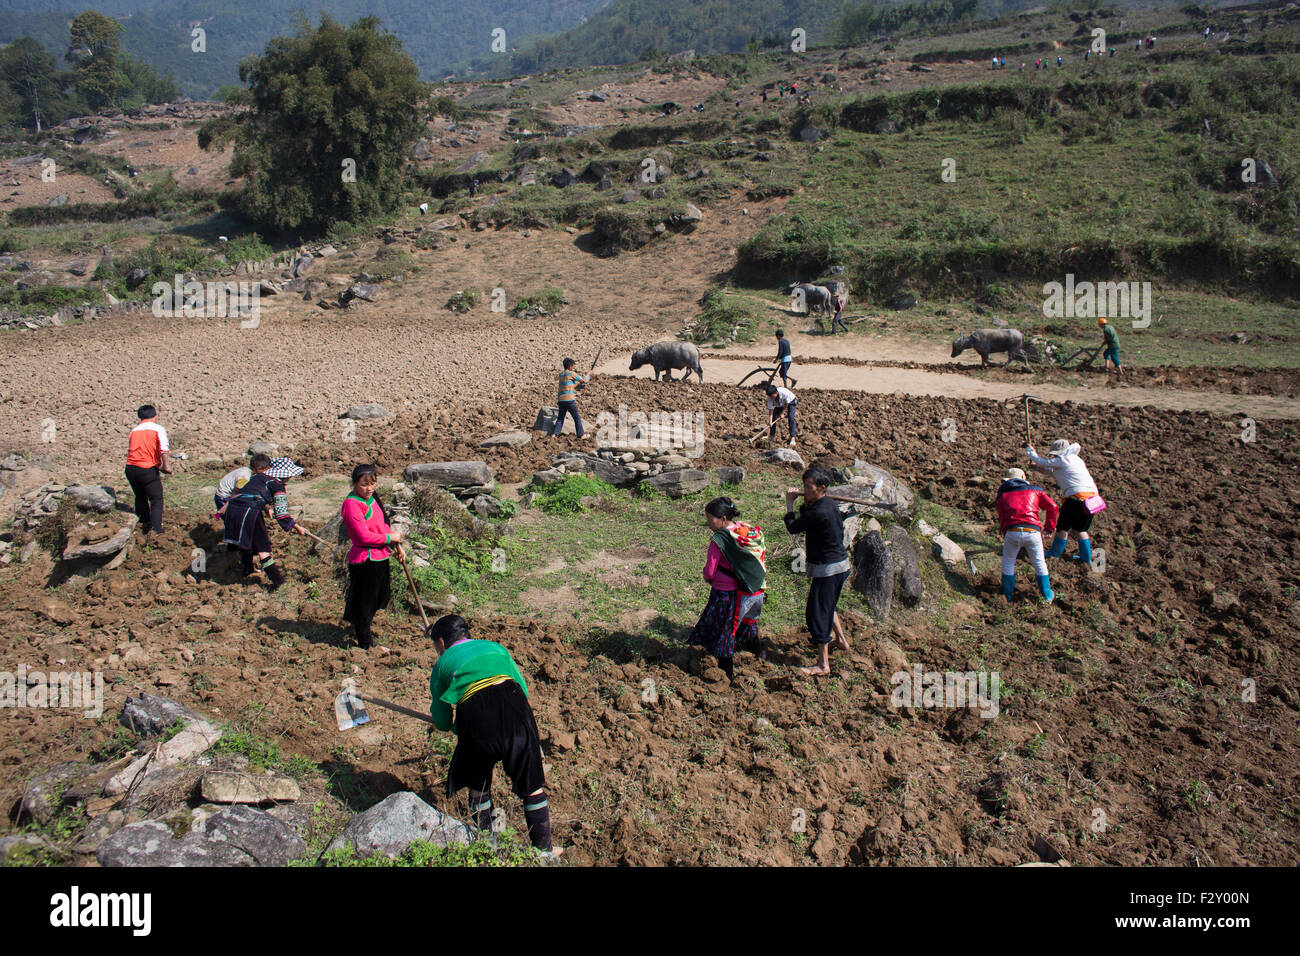 A family is cultivating land in Northern Vietnam Stock Photo